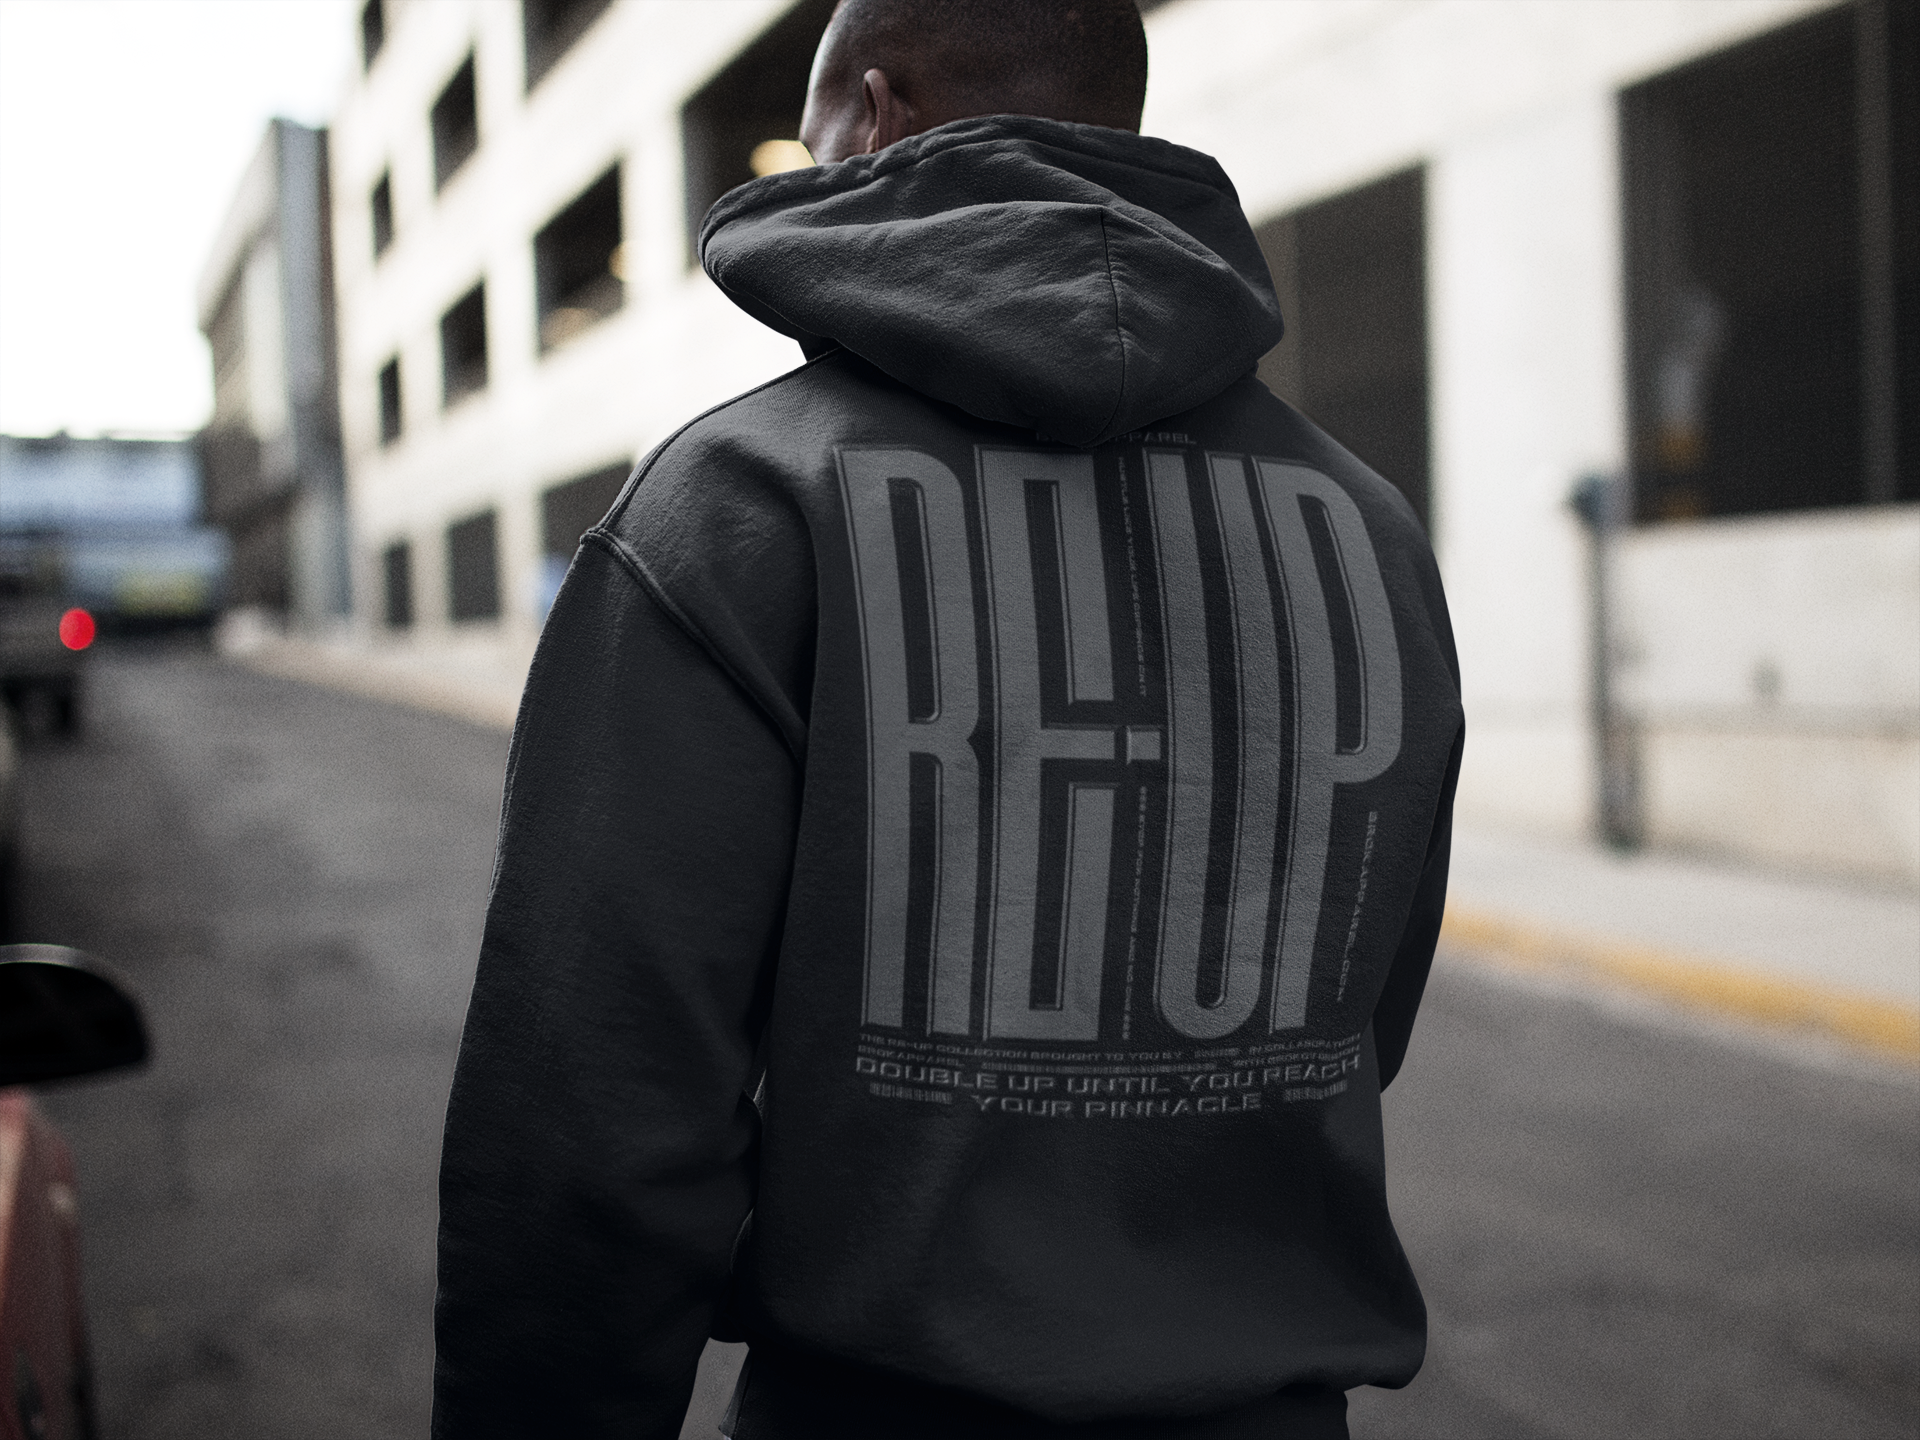 THE RE-UP HOODIE